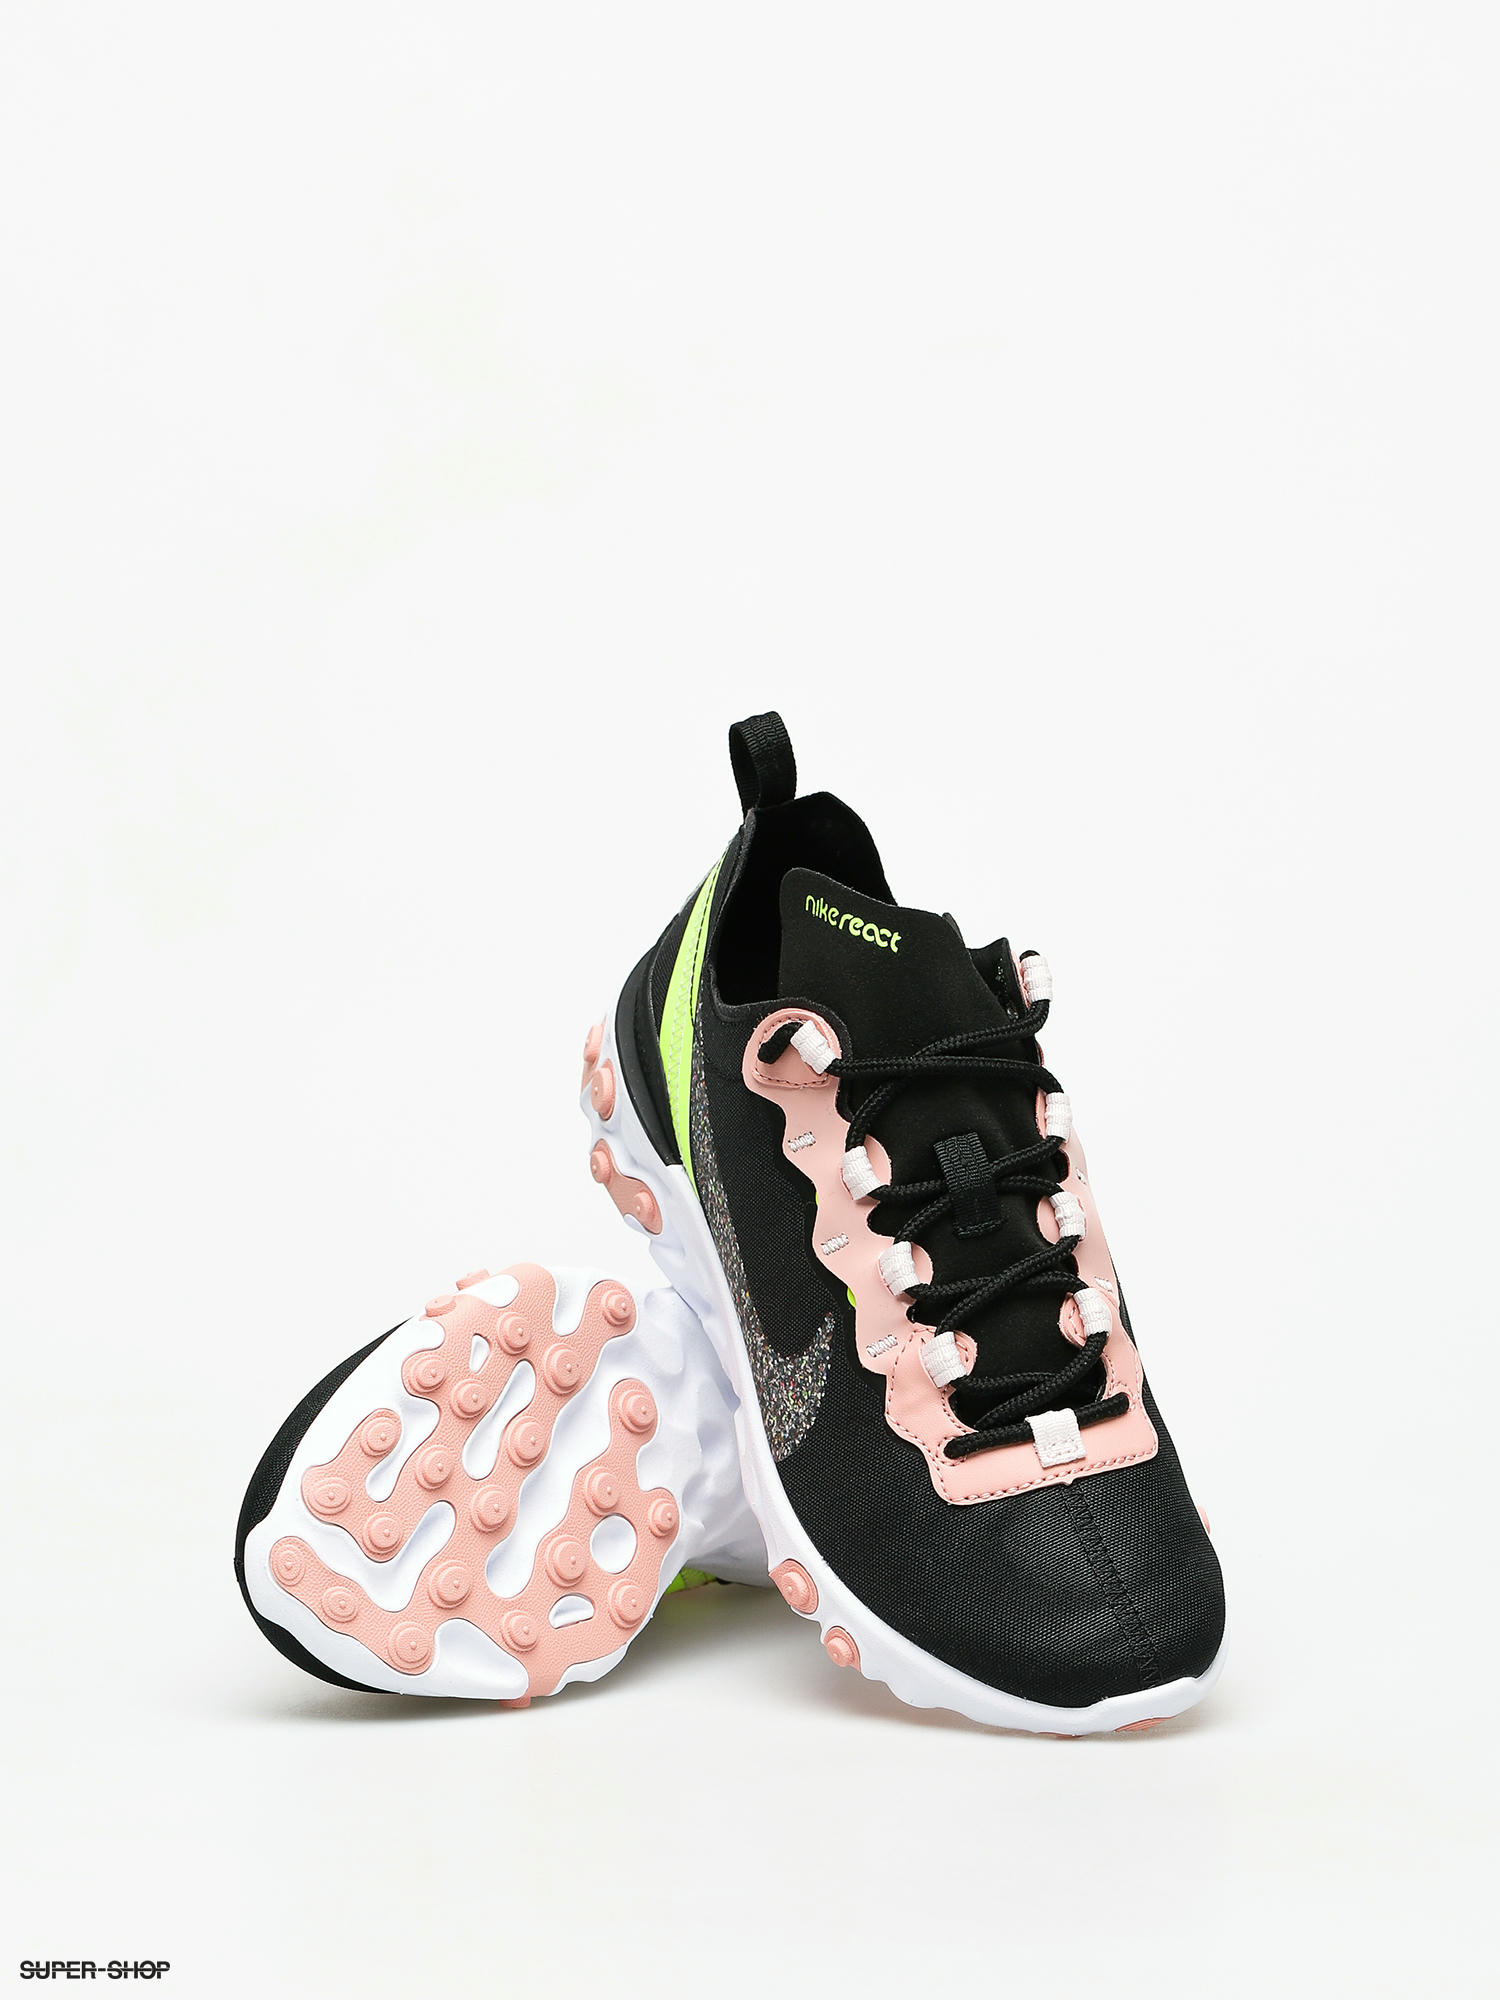 nike react element 55 coral stardust